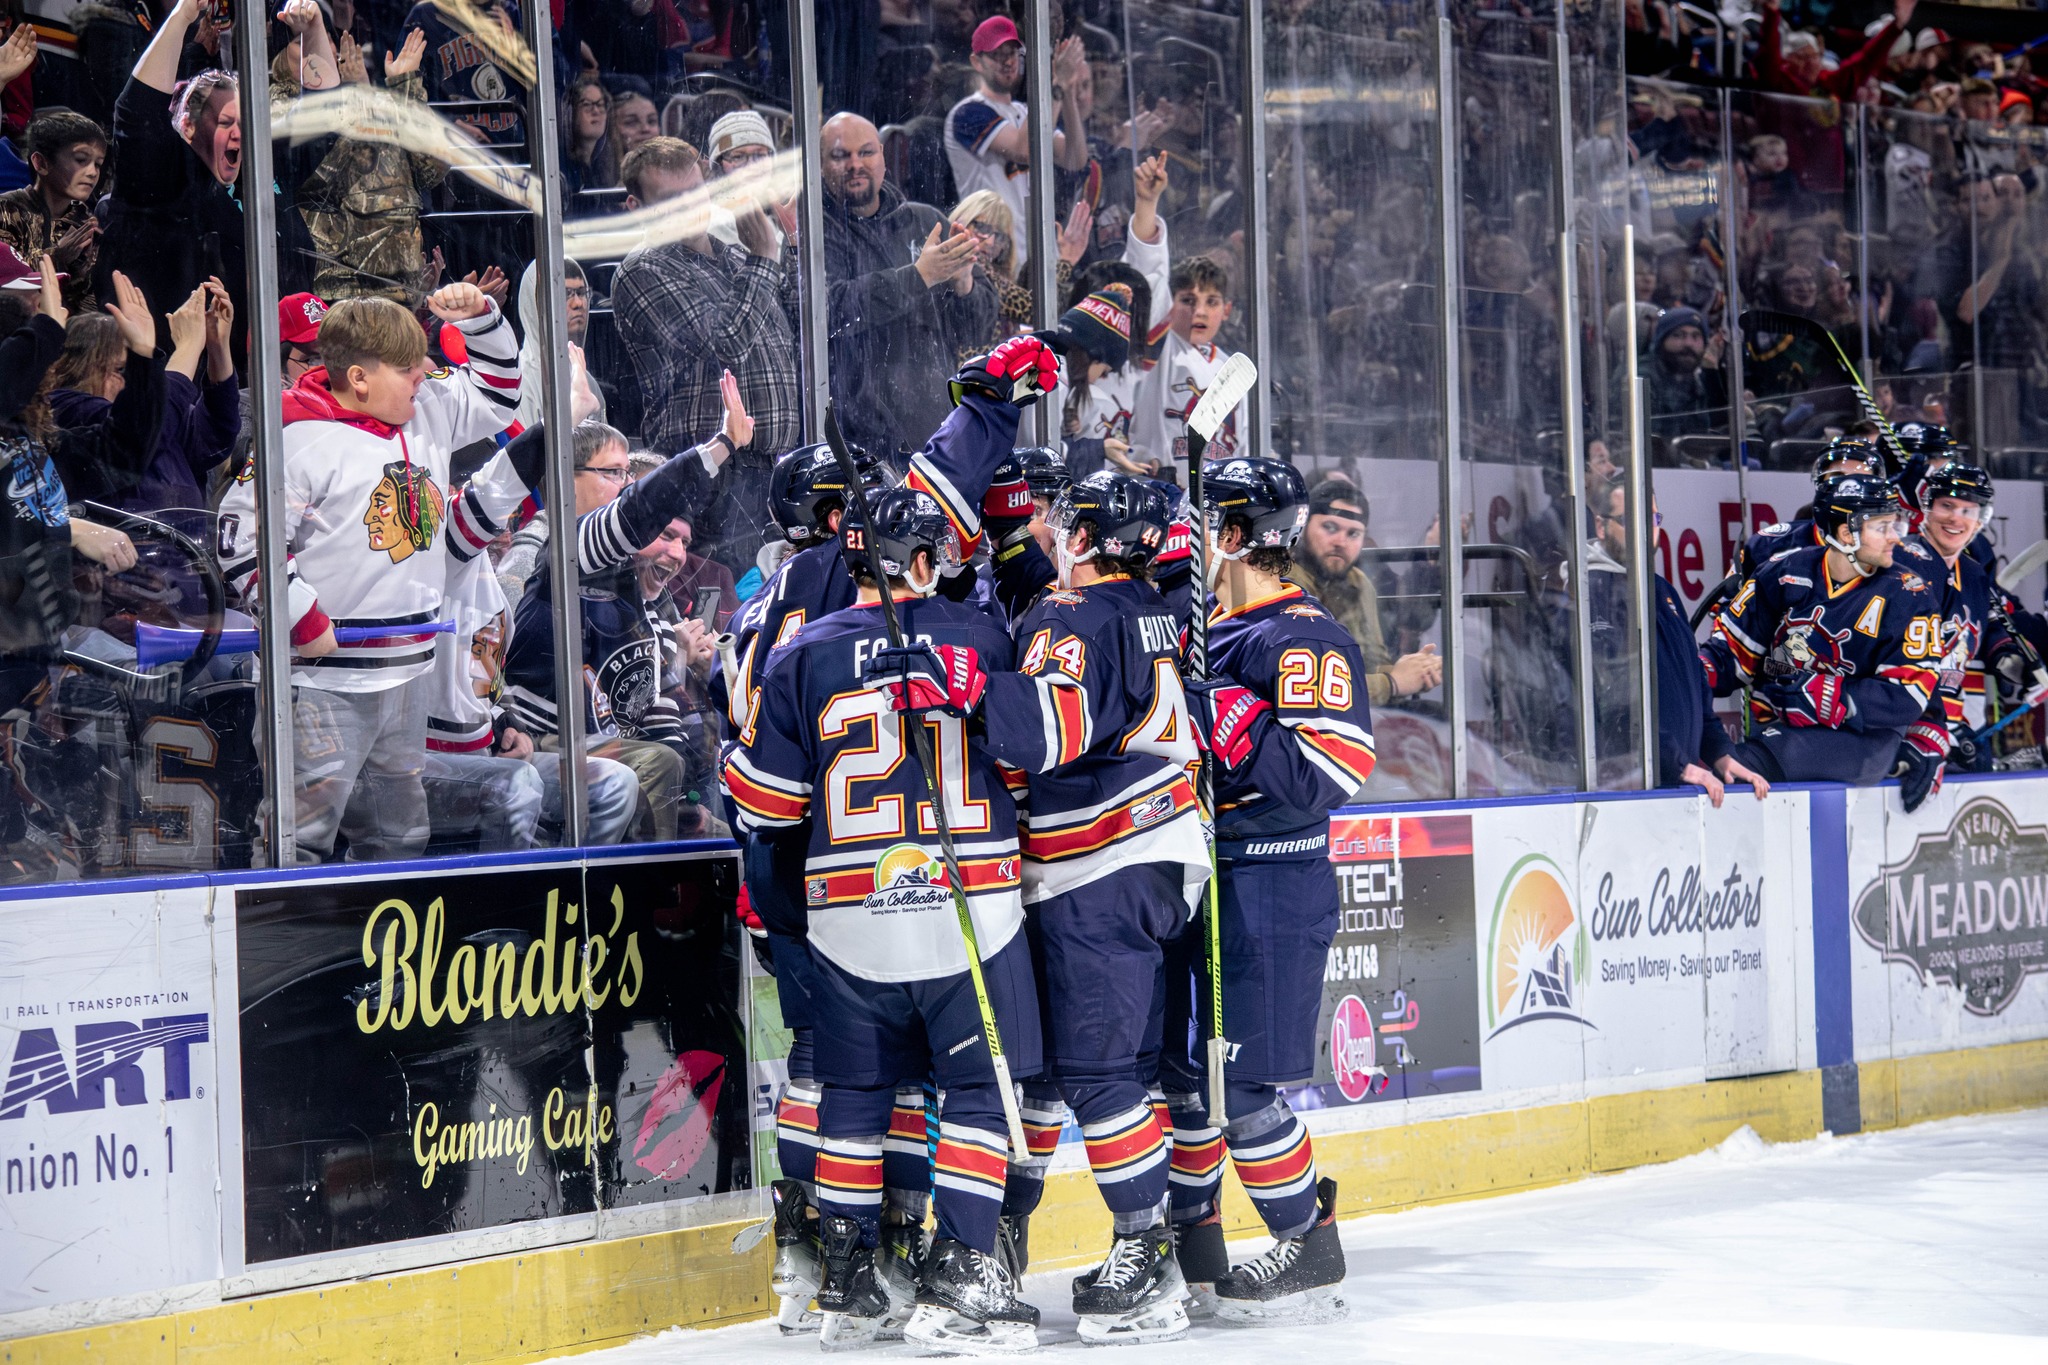 Peoria Rivermen announce they are extending lease with Peoria Civic Center